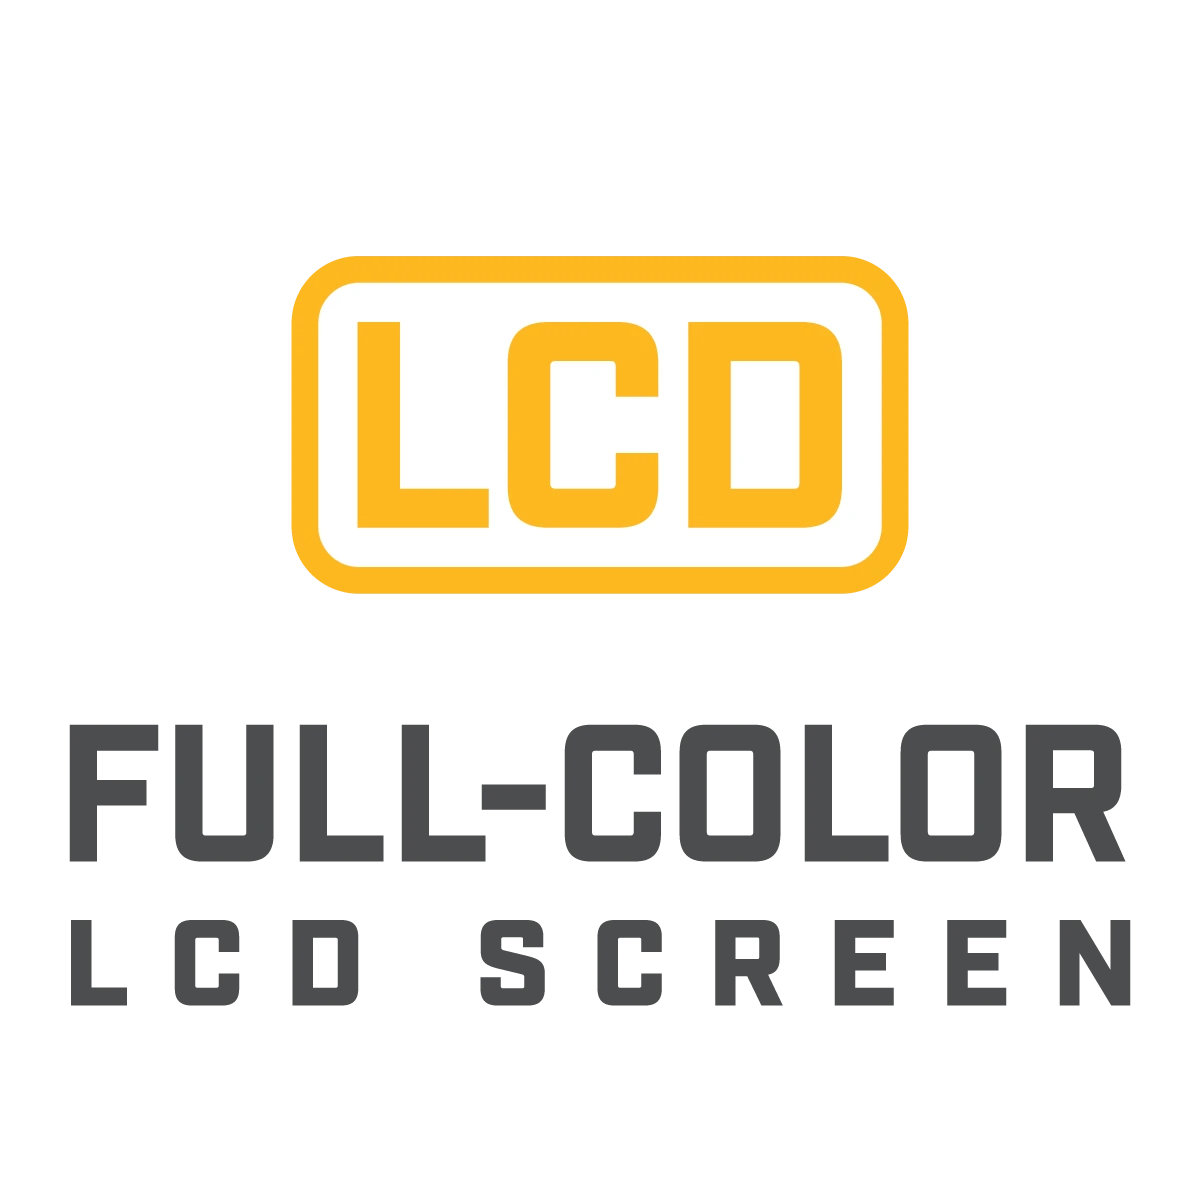 Full Color LCD Screen Icon